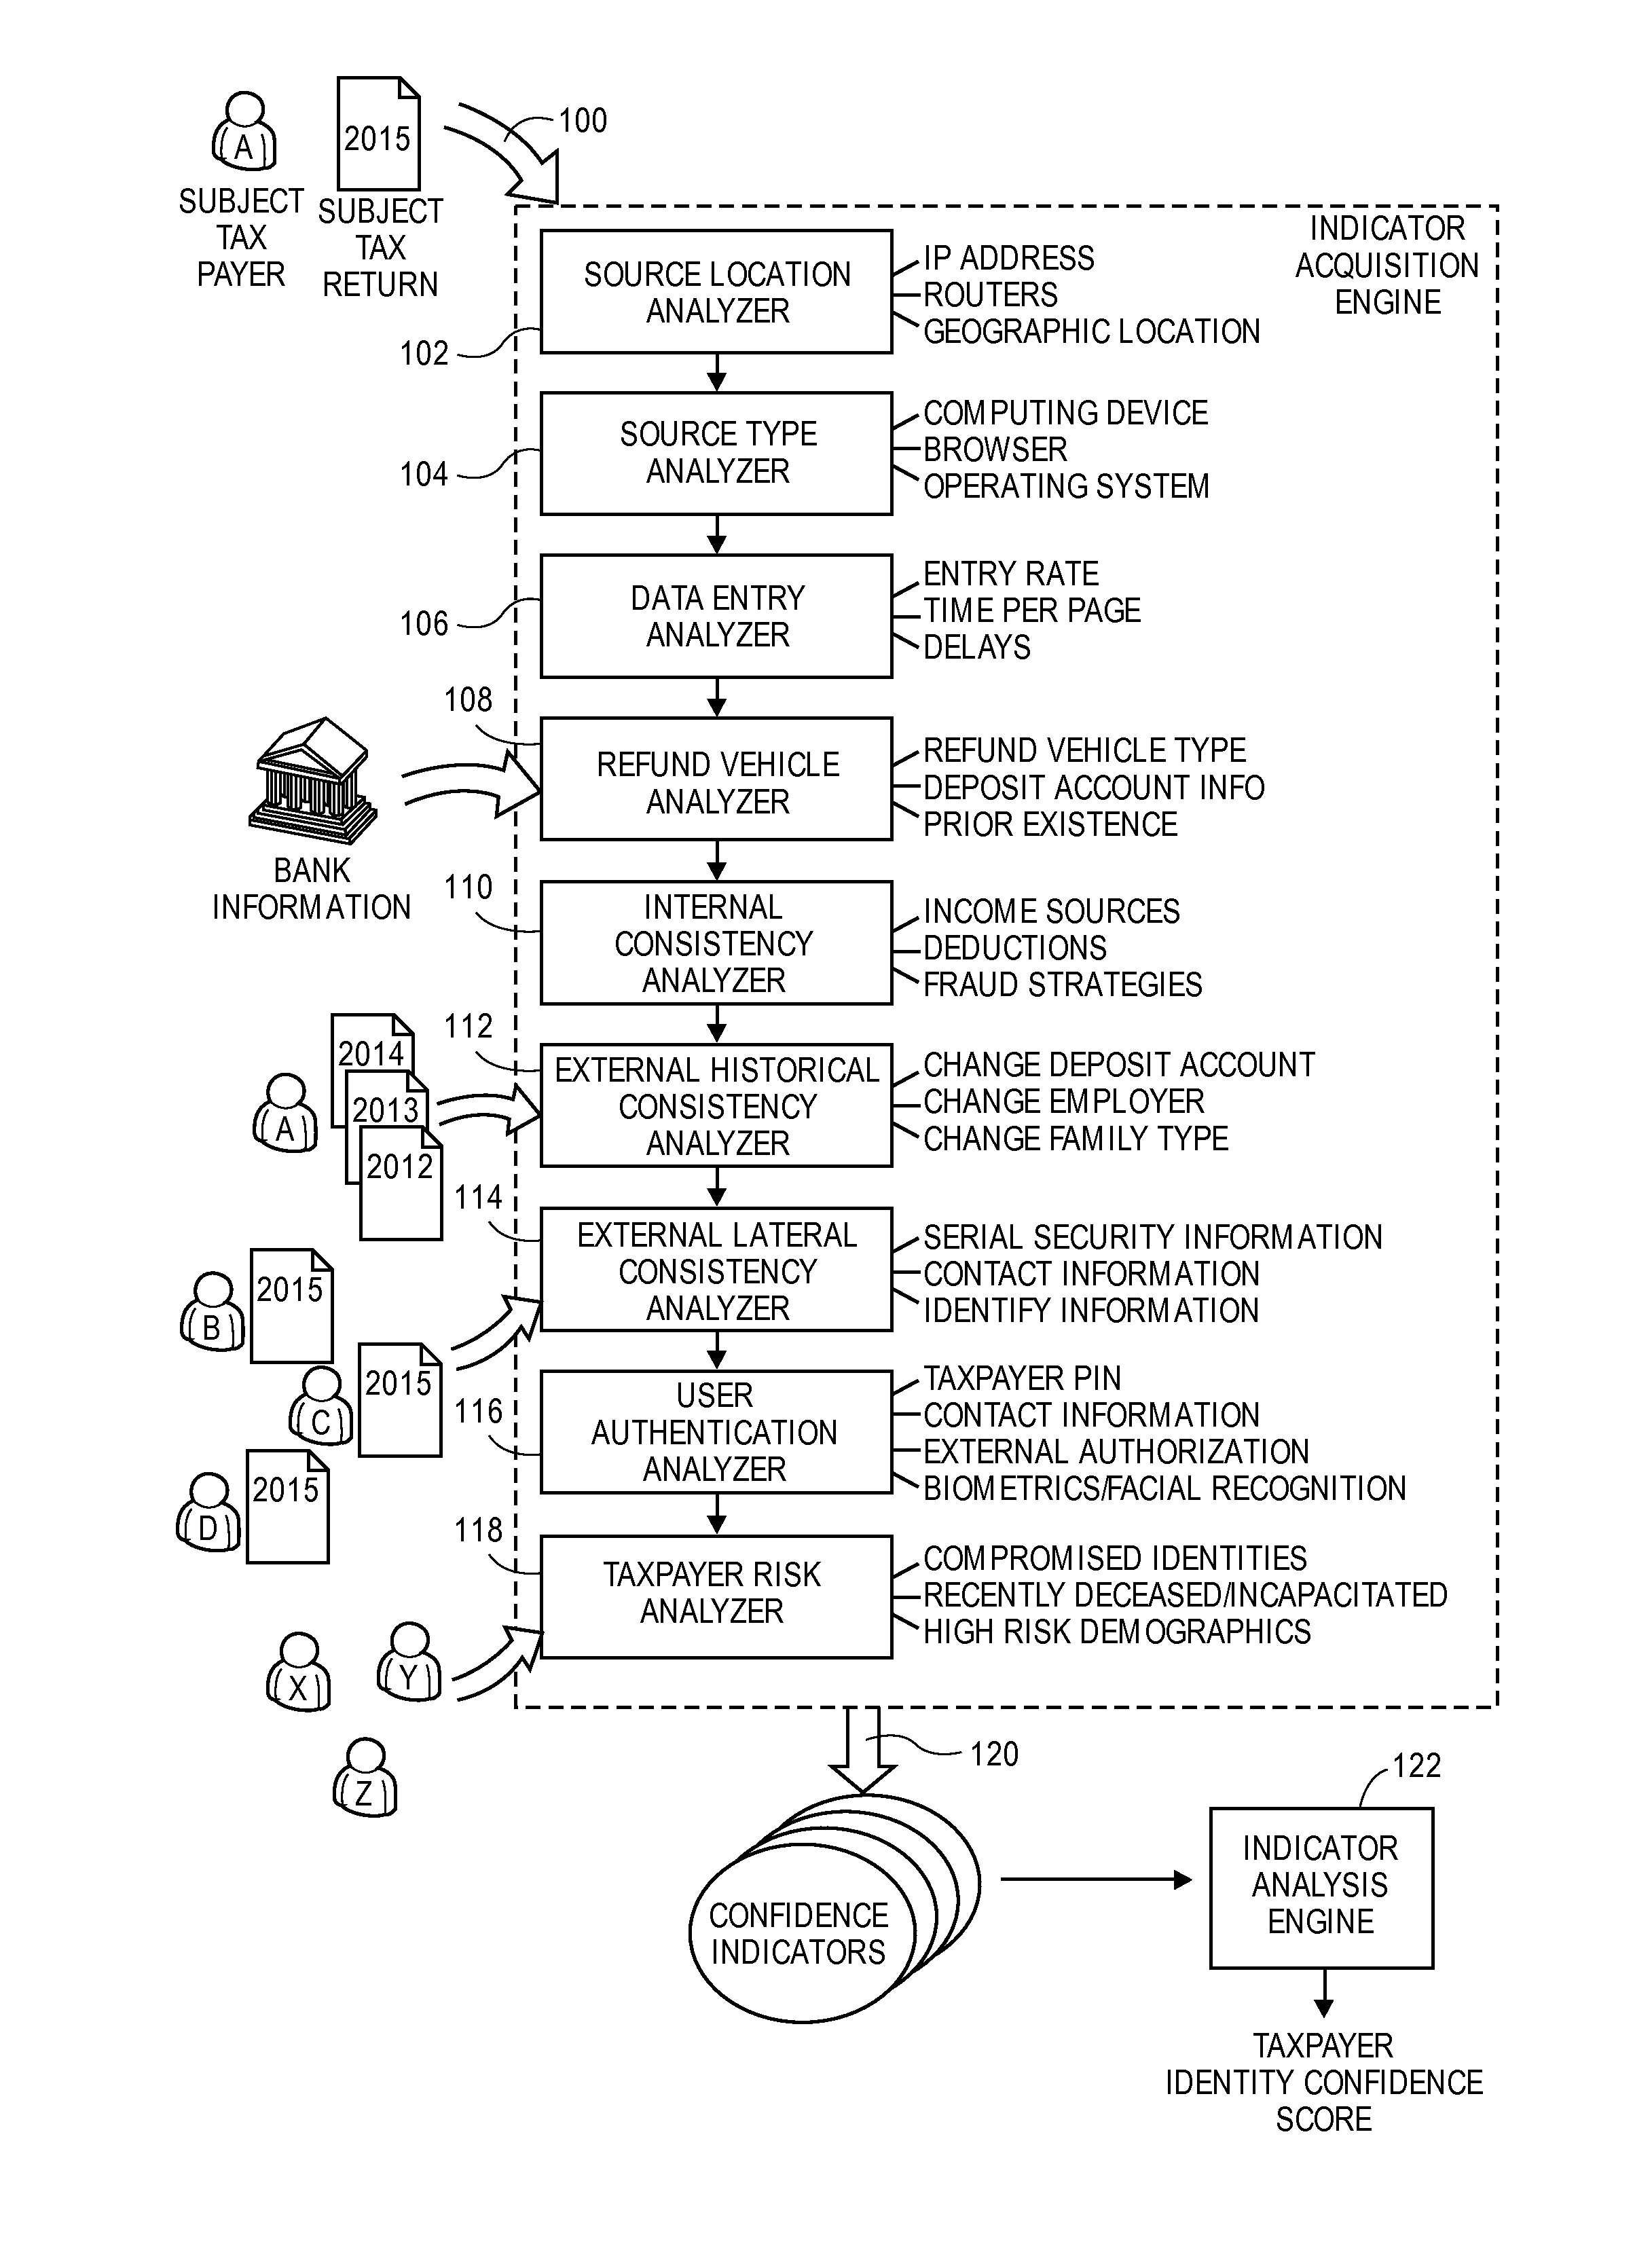 Computer program, method, and system for detecting fraudulently filed tax returns